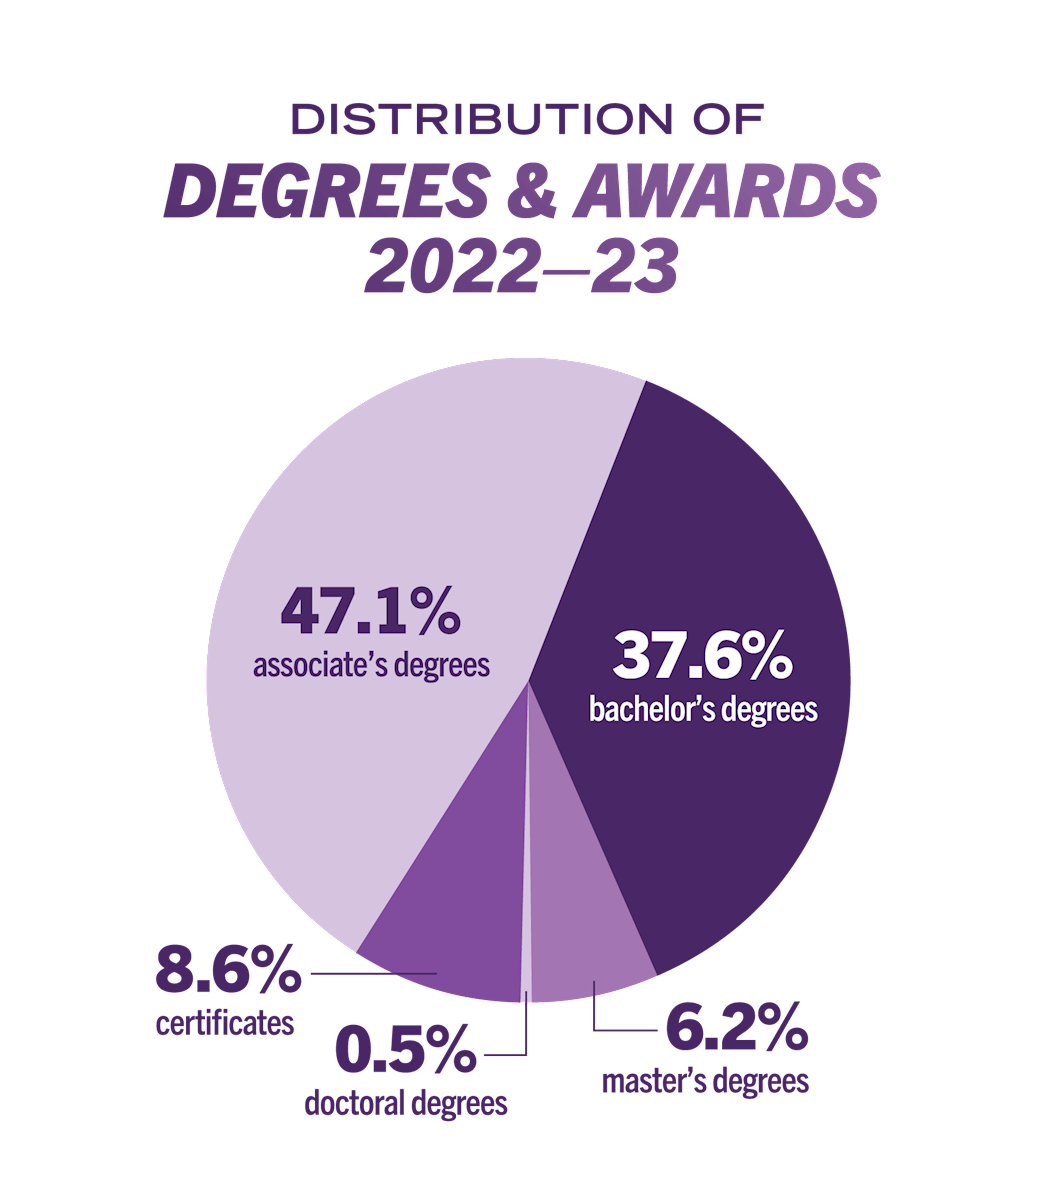 2022-23 degrees awarded: 47.1% associates, 37.6% bachelors, 8.6% certificates, 6.2% masters degrees & less than 1% doctoral degrees.